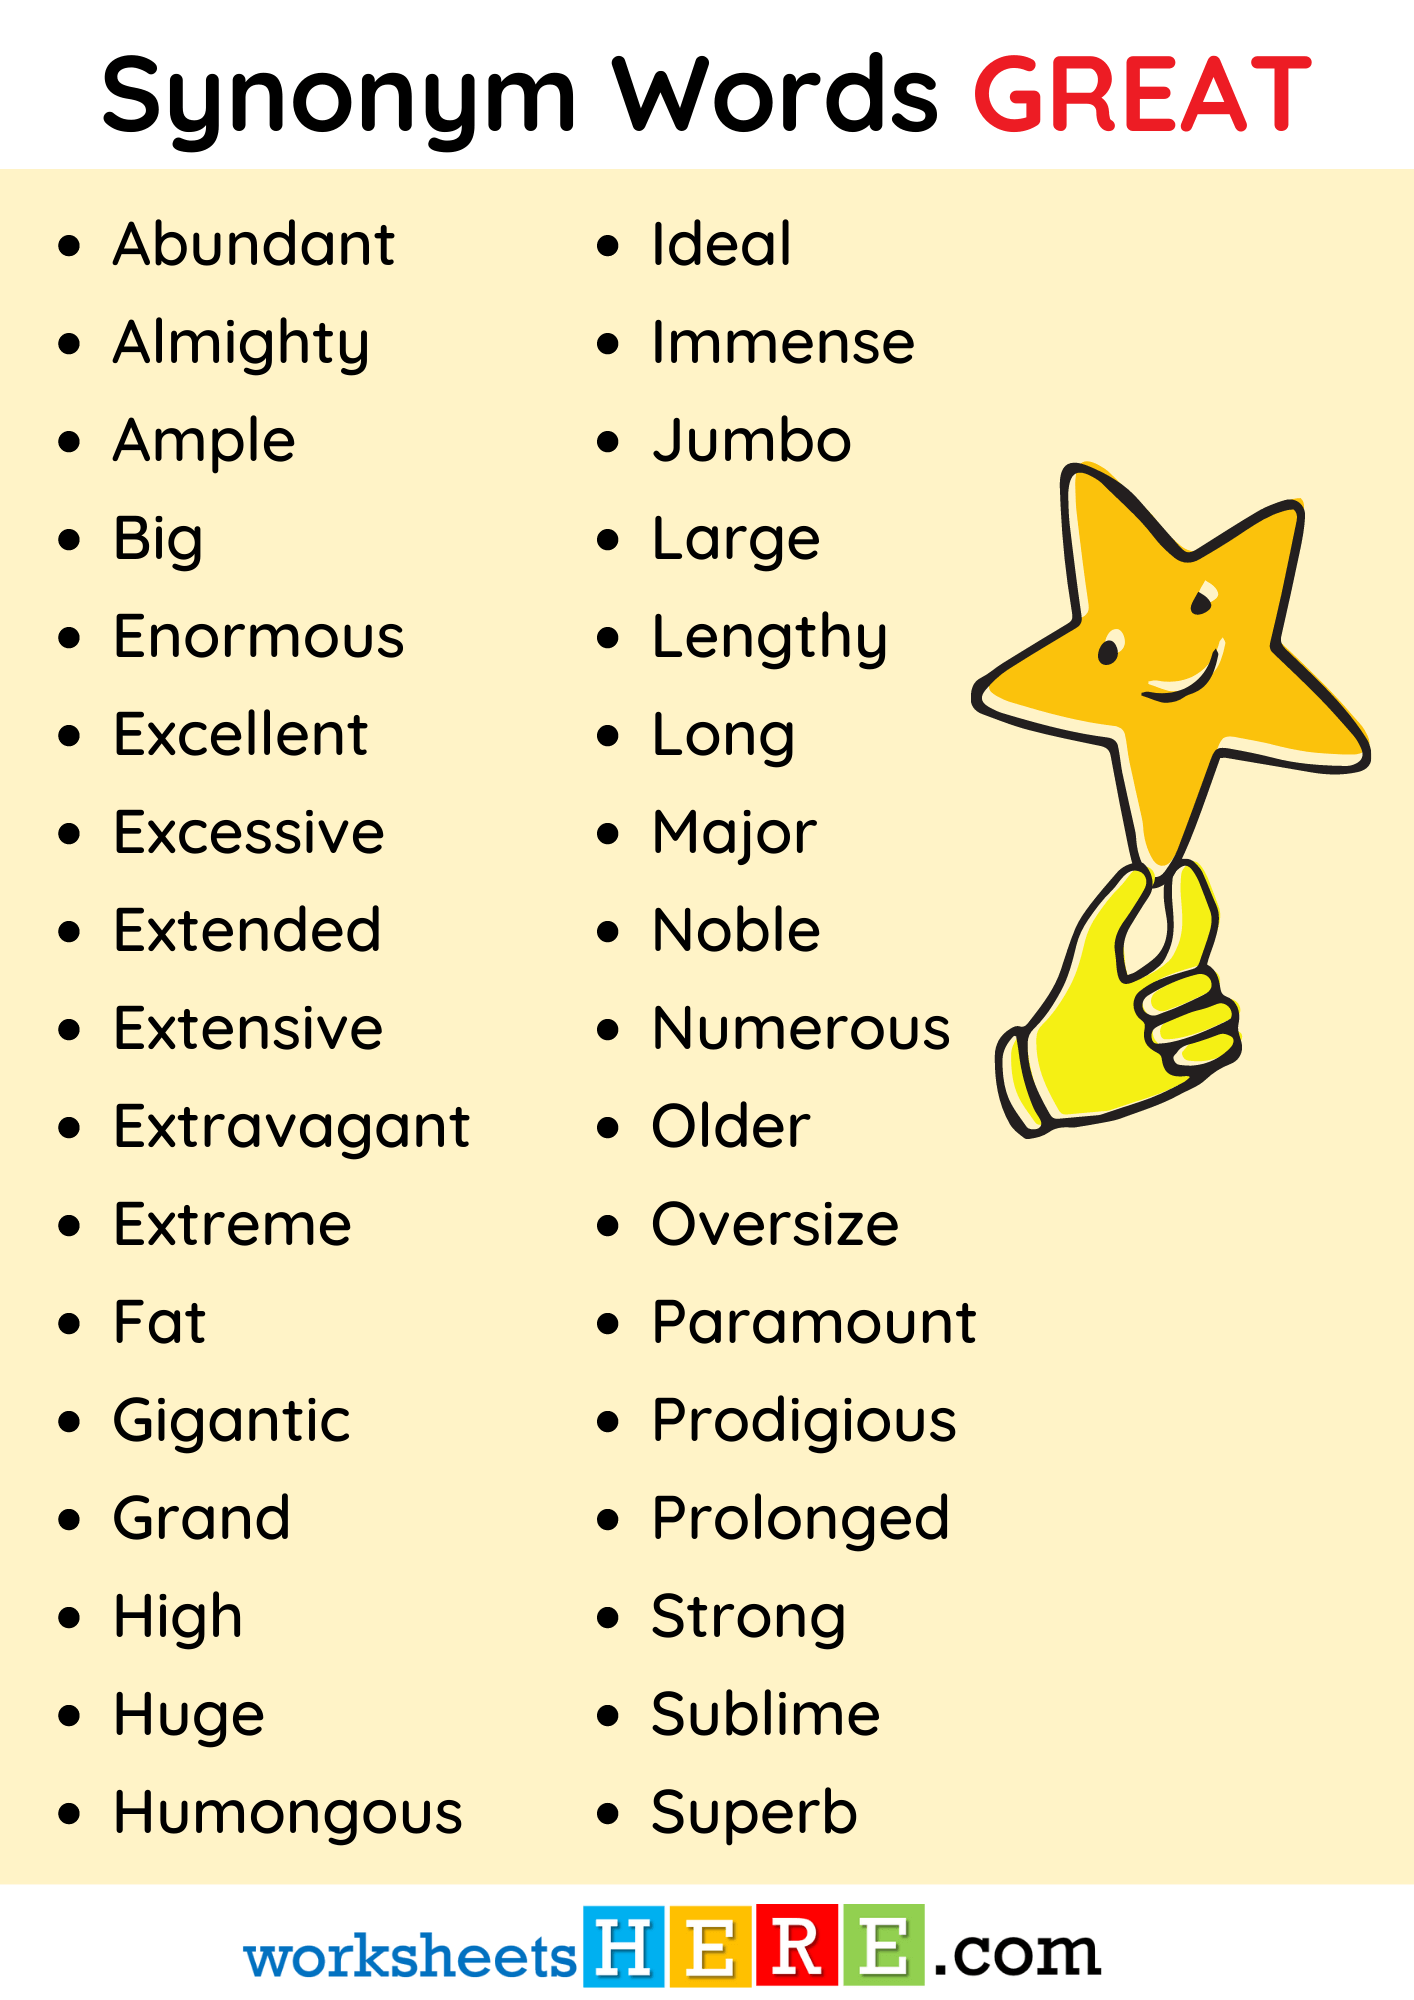 Synonym Words List with GREAT PDF Worksheet For Students